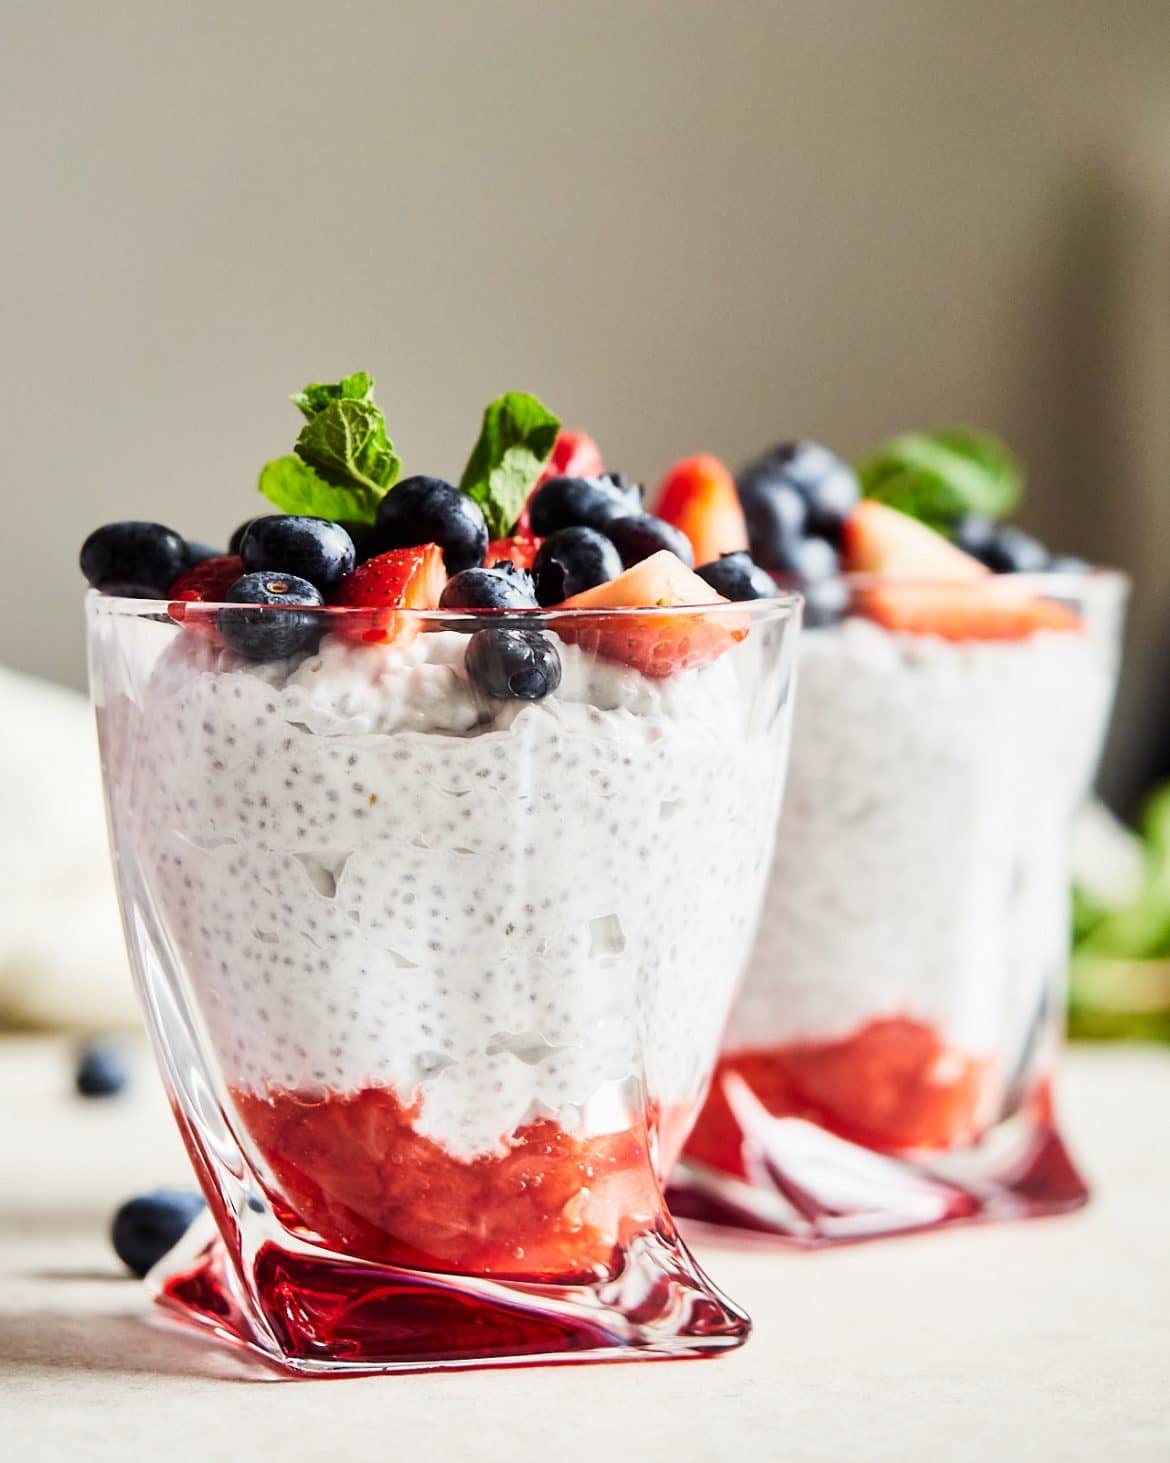 Keto Chia Pudding With Strawberries